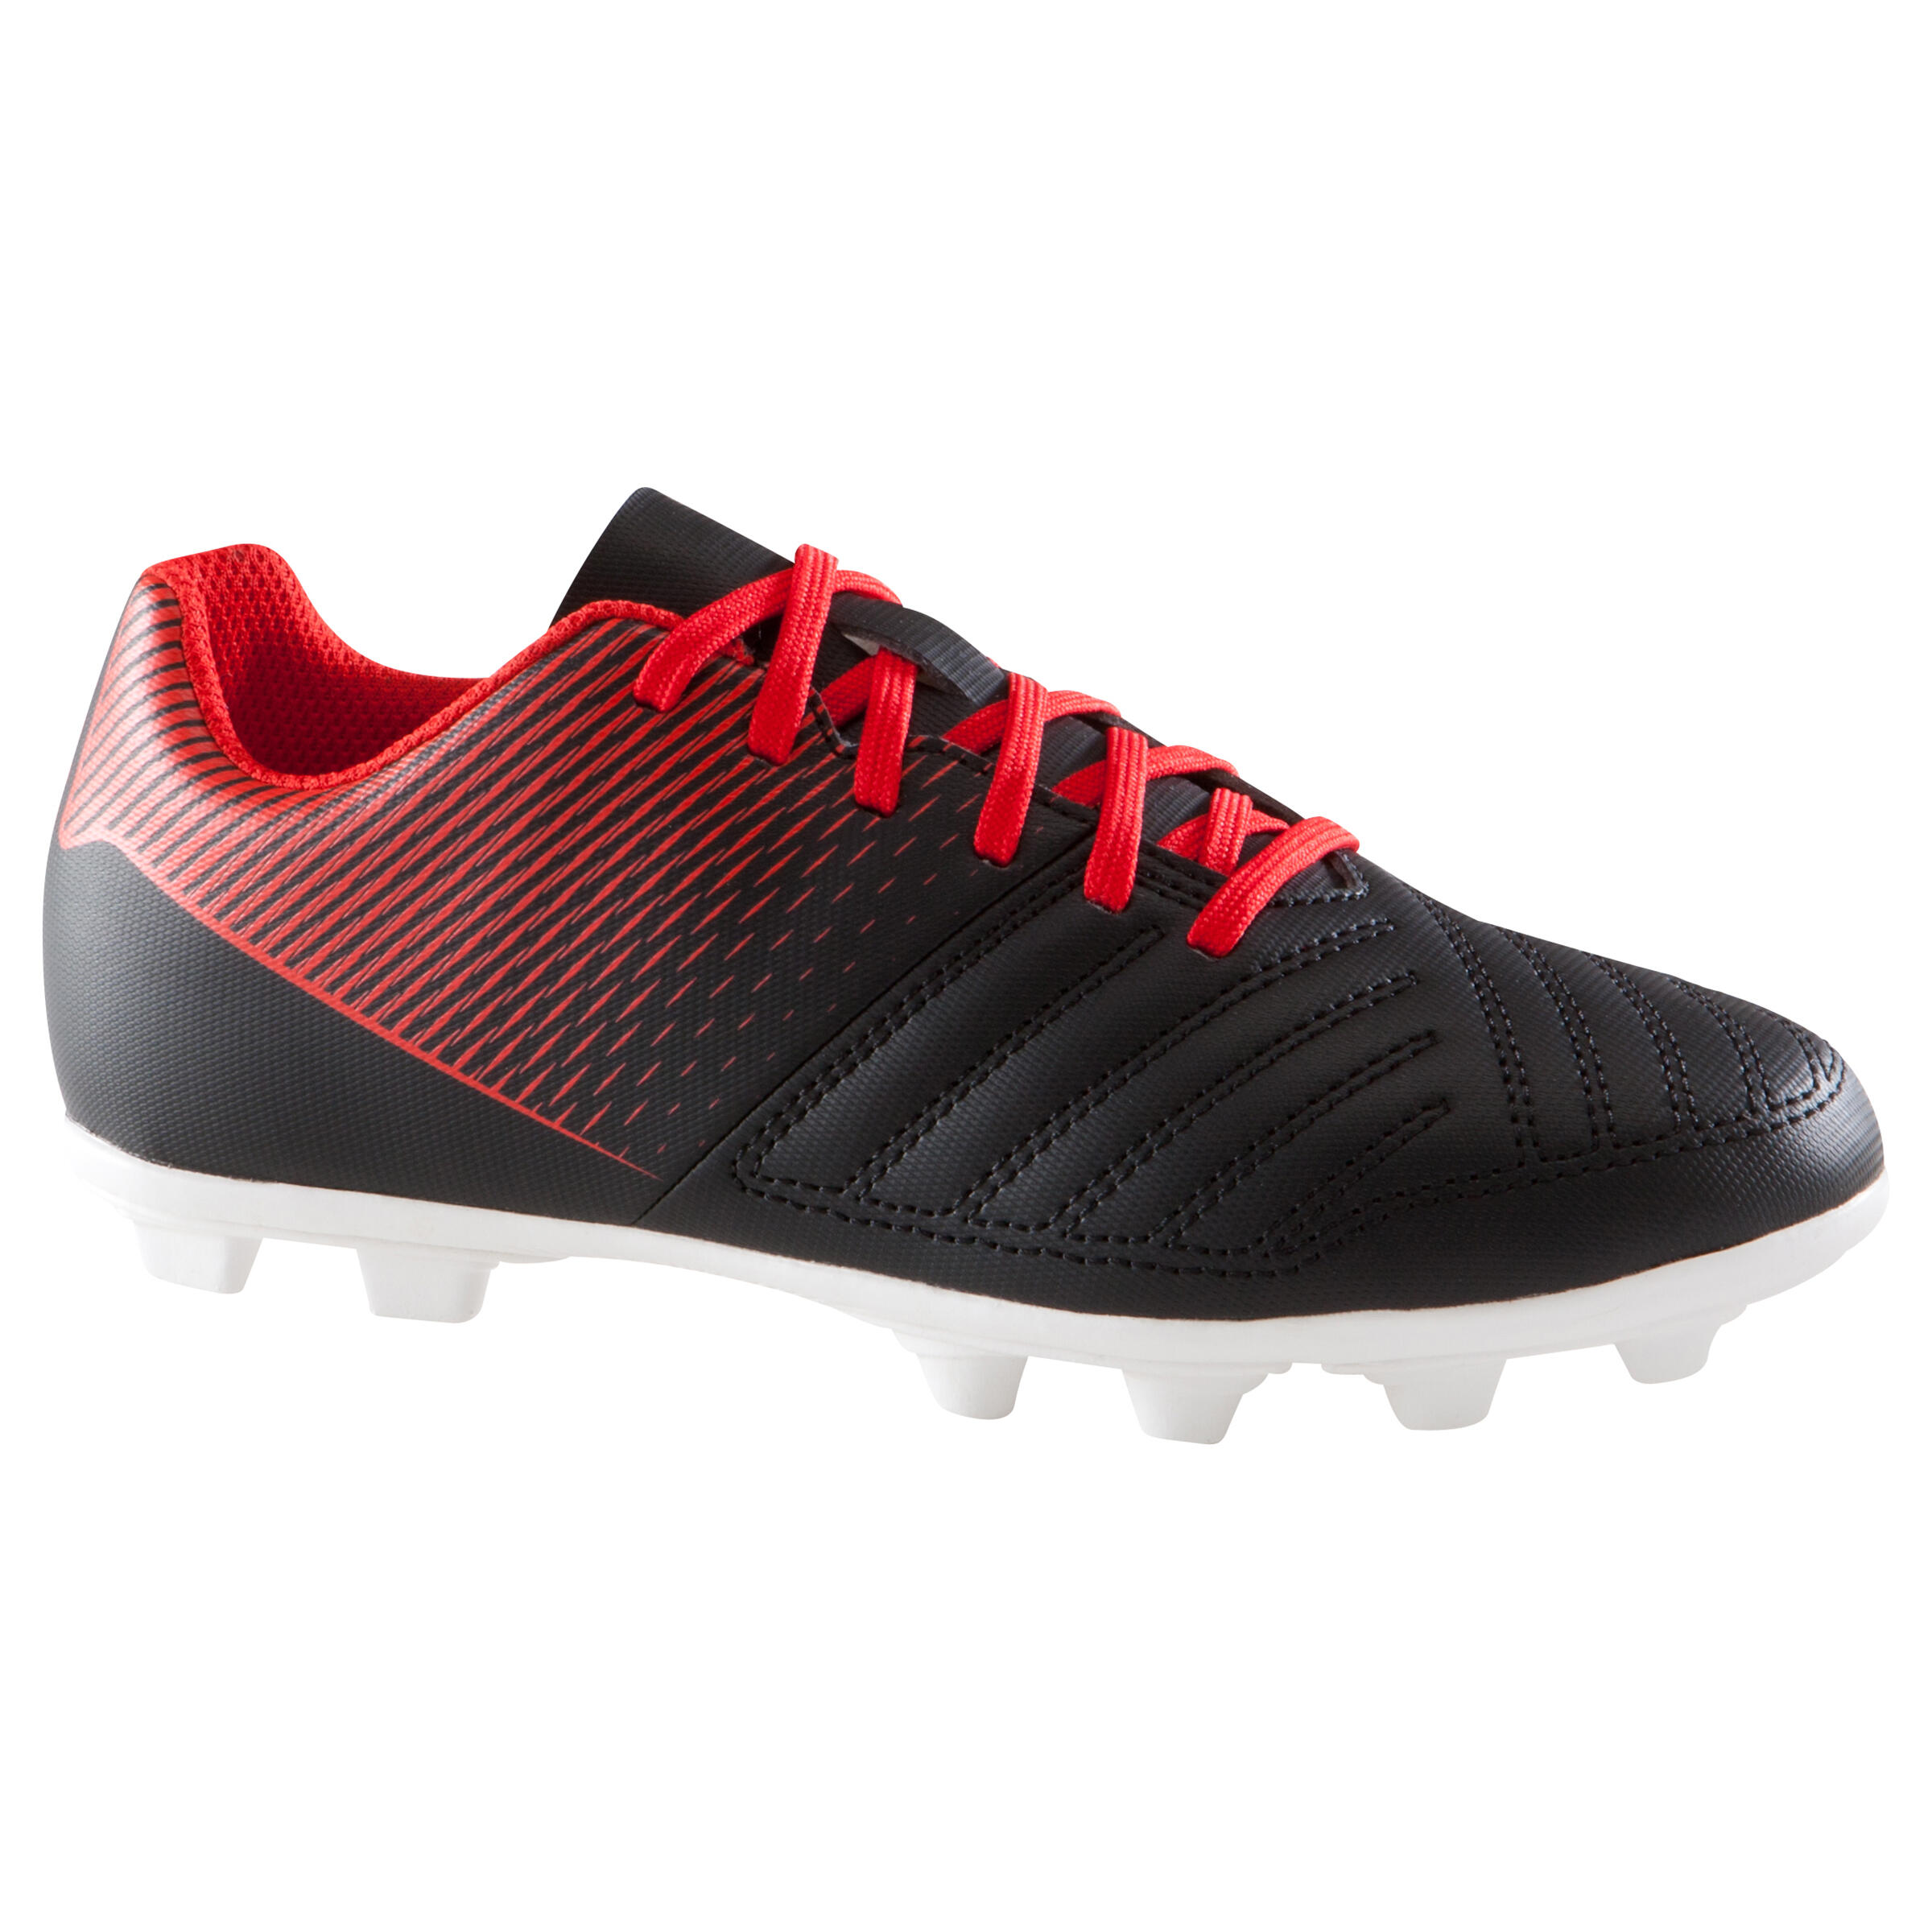 Buy Football Shoes \u0026 Boots Online India